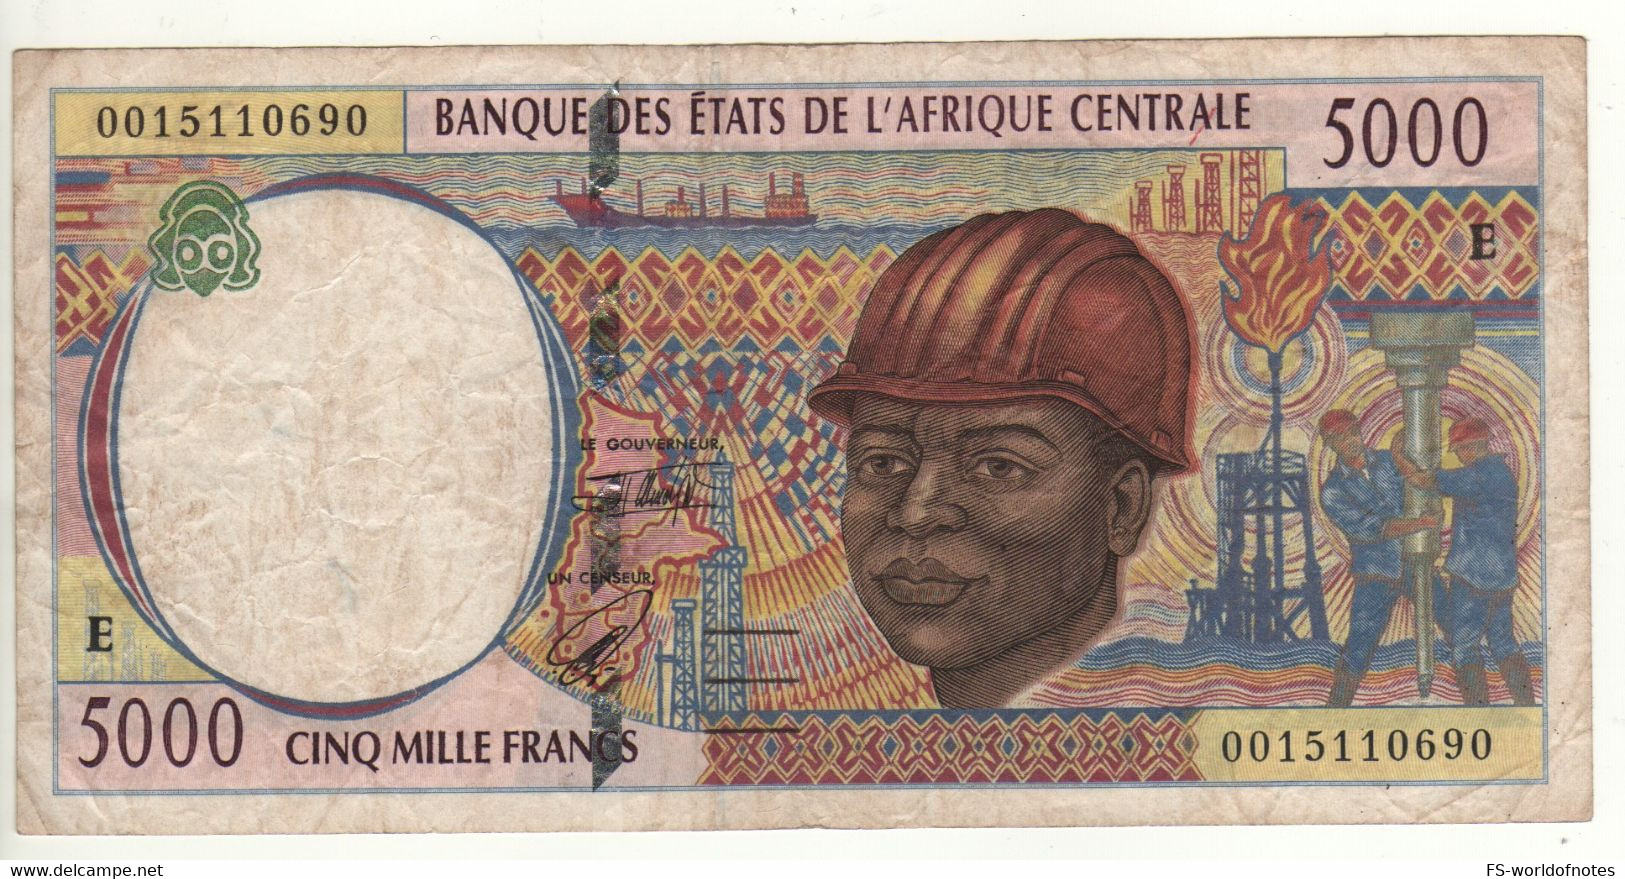 CAMEROON  5'000 Fr  (Central African States  P204Ef  Dated  2000)  (Oil-rigs Workers+ Cotton Picking At Back)  UNC - Cameroun